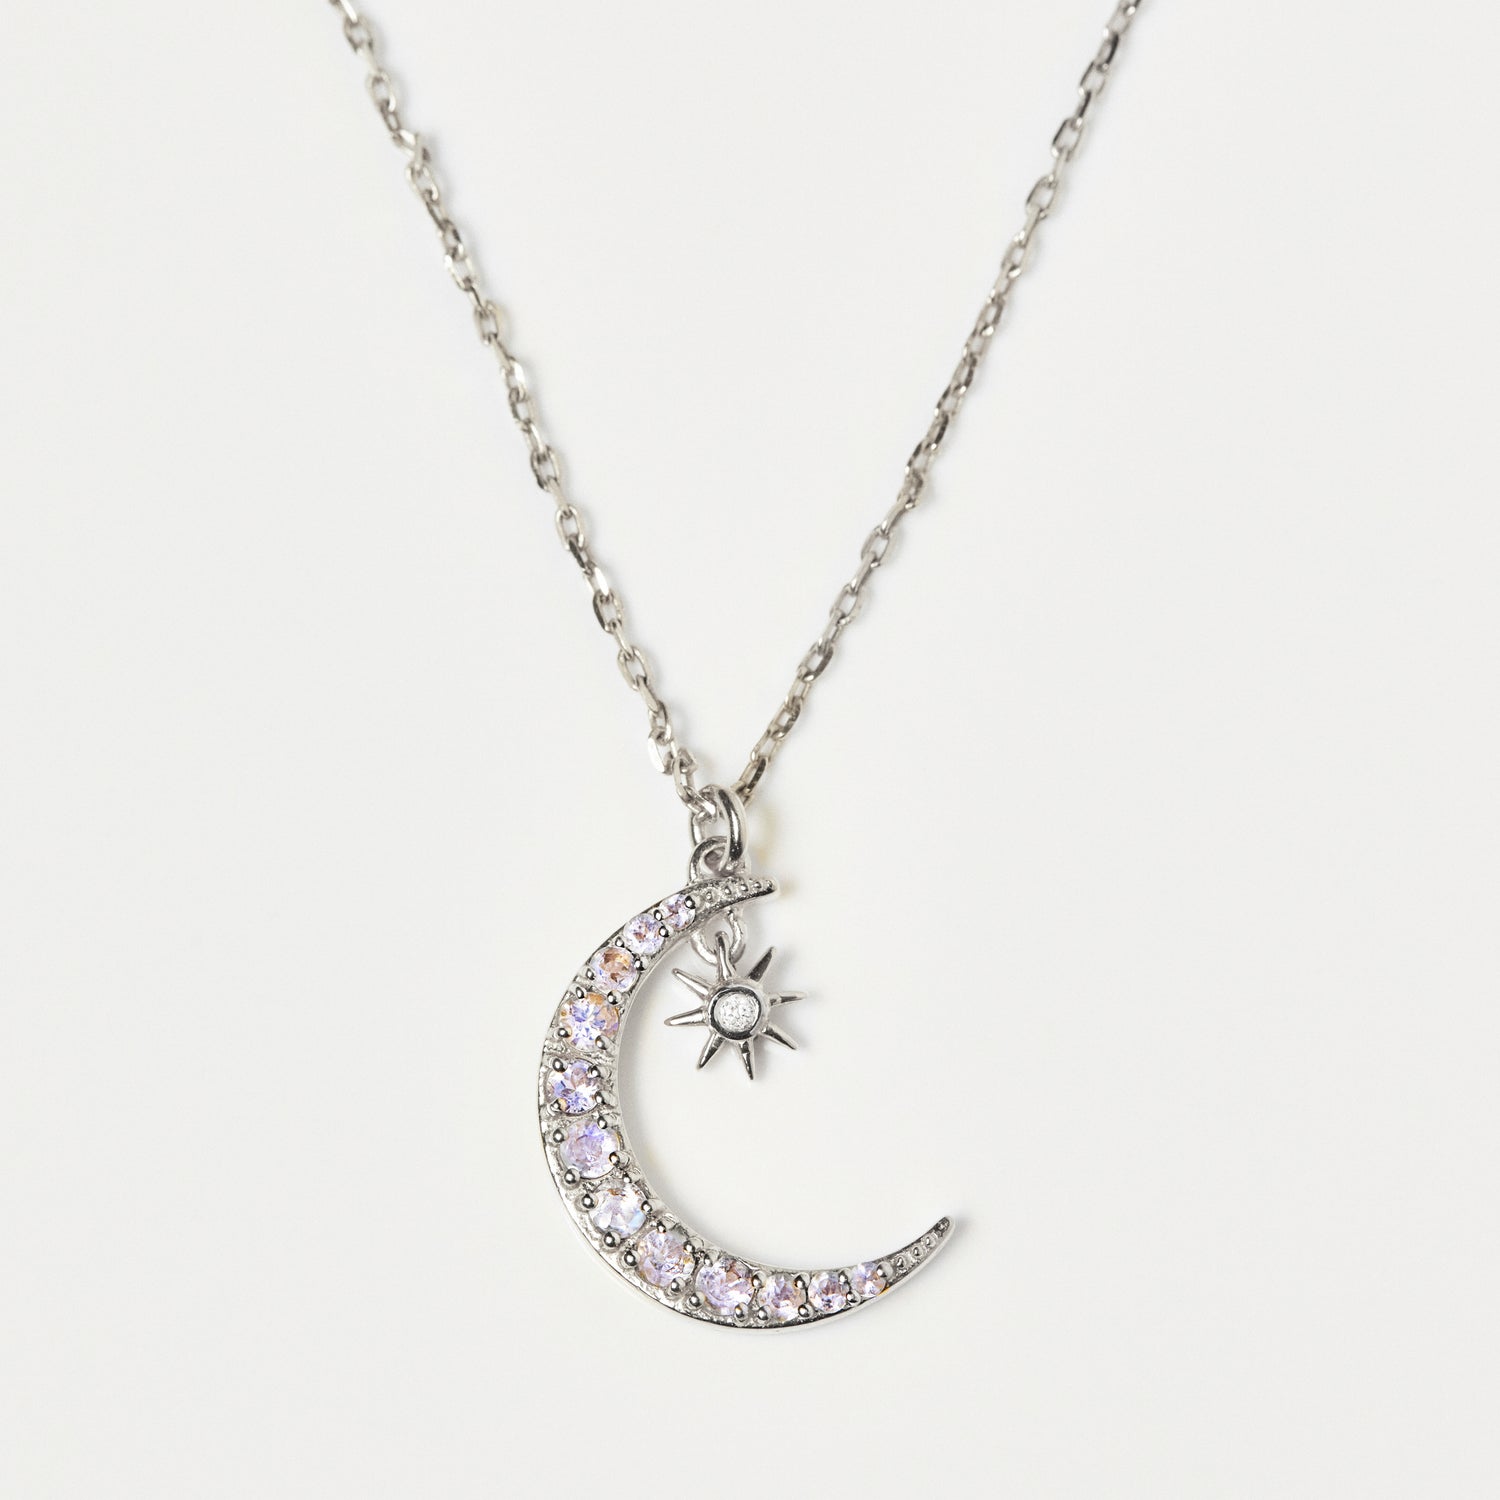 Sterling Silver Moon & Star Pendant Necklace in Moonstone & Diamond - Necklace - Carrie Elizabeth